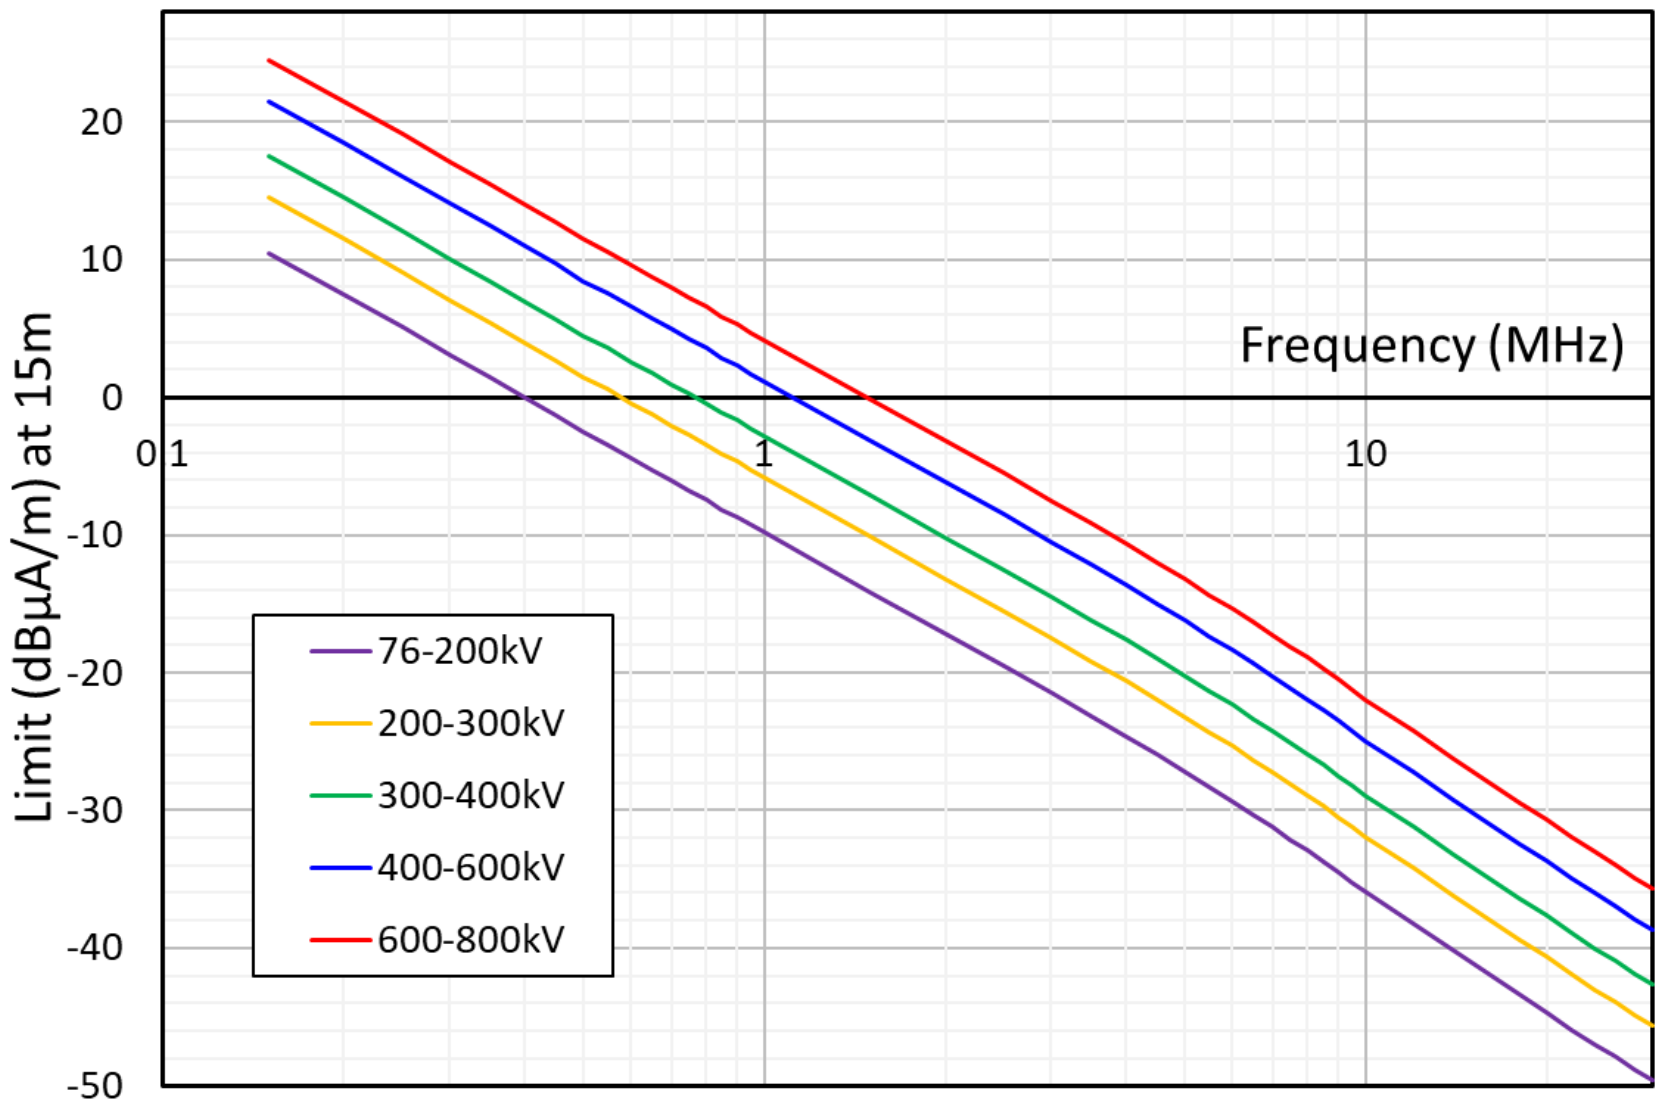 Figure 1: Magnetic field strength limits for transmission lines (at 15 m distance) (the long description is located below the             image)